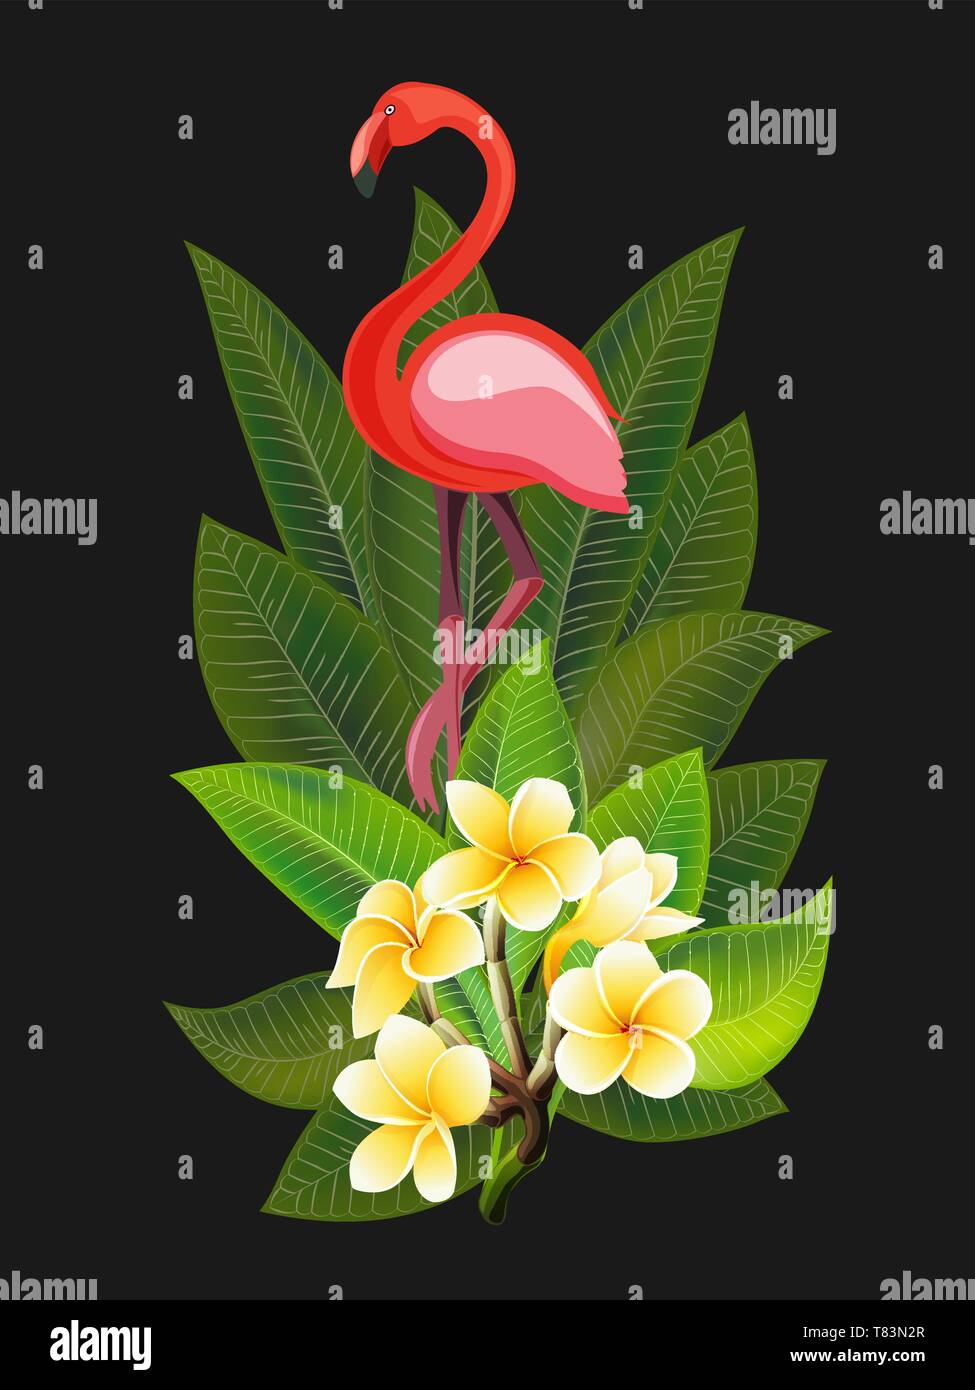 Summer design for advertising with flamingo, tropical leaves and flowers Stock Vector